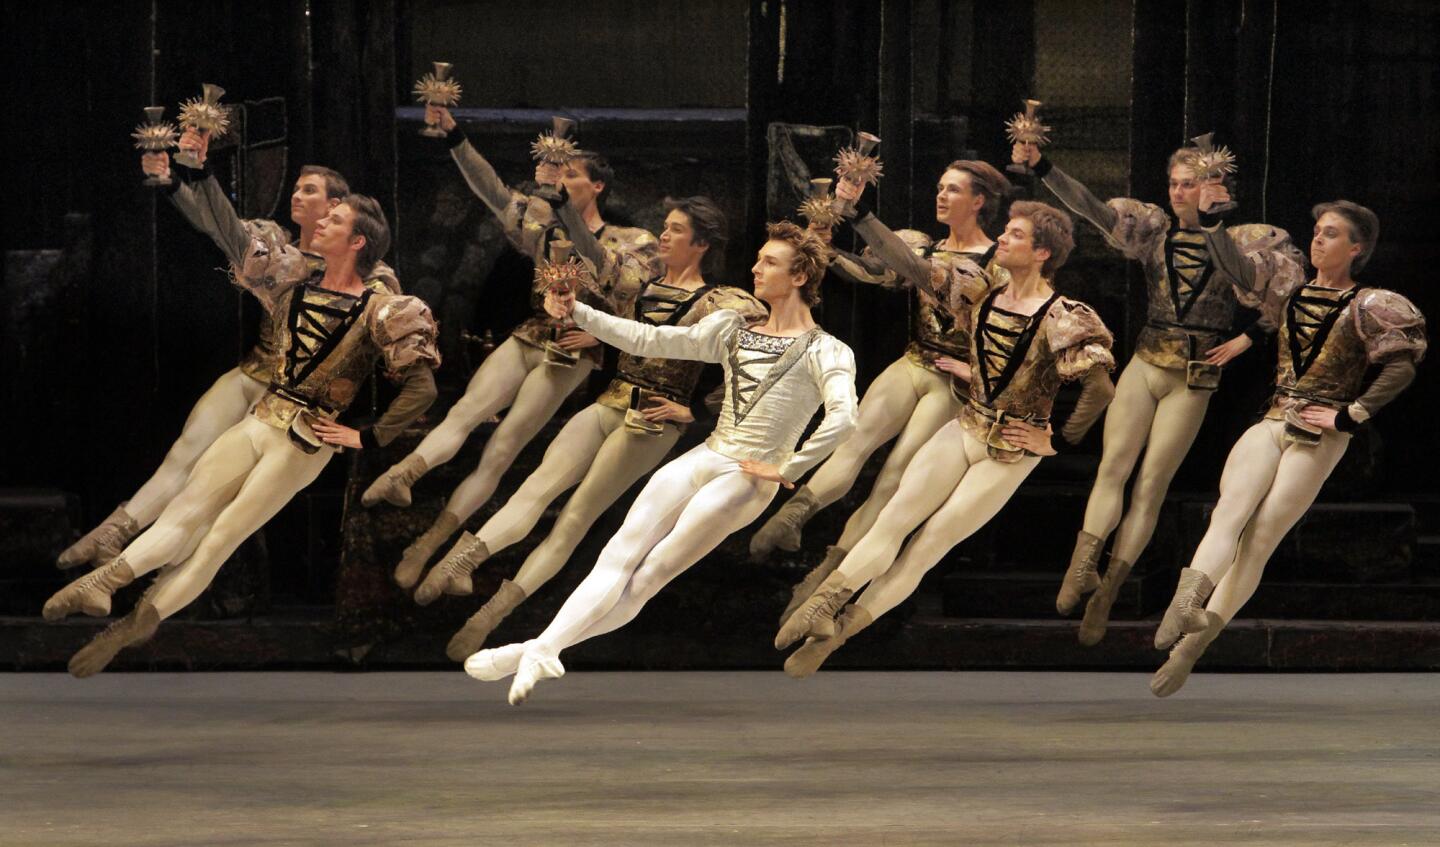 Arts and culture in pictures by The Times | Bolshoi's 'Swan Lake'